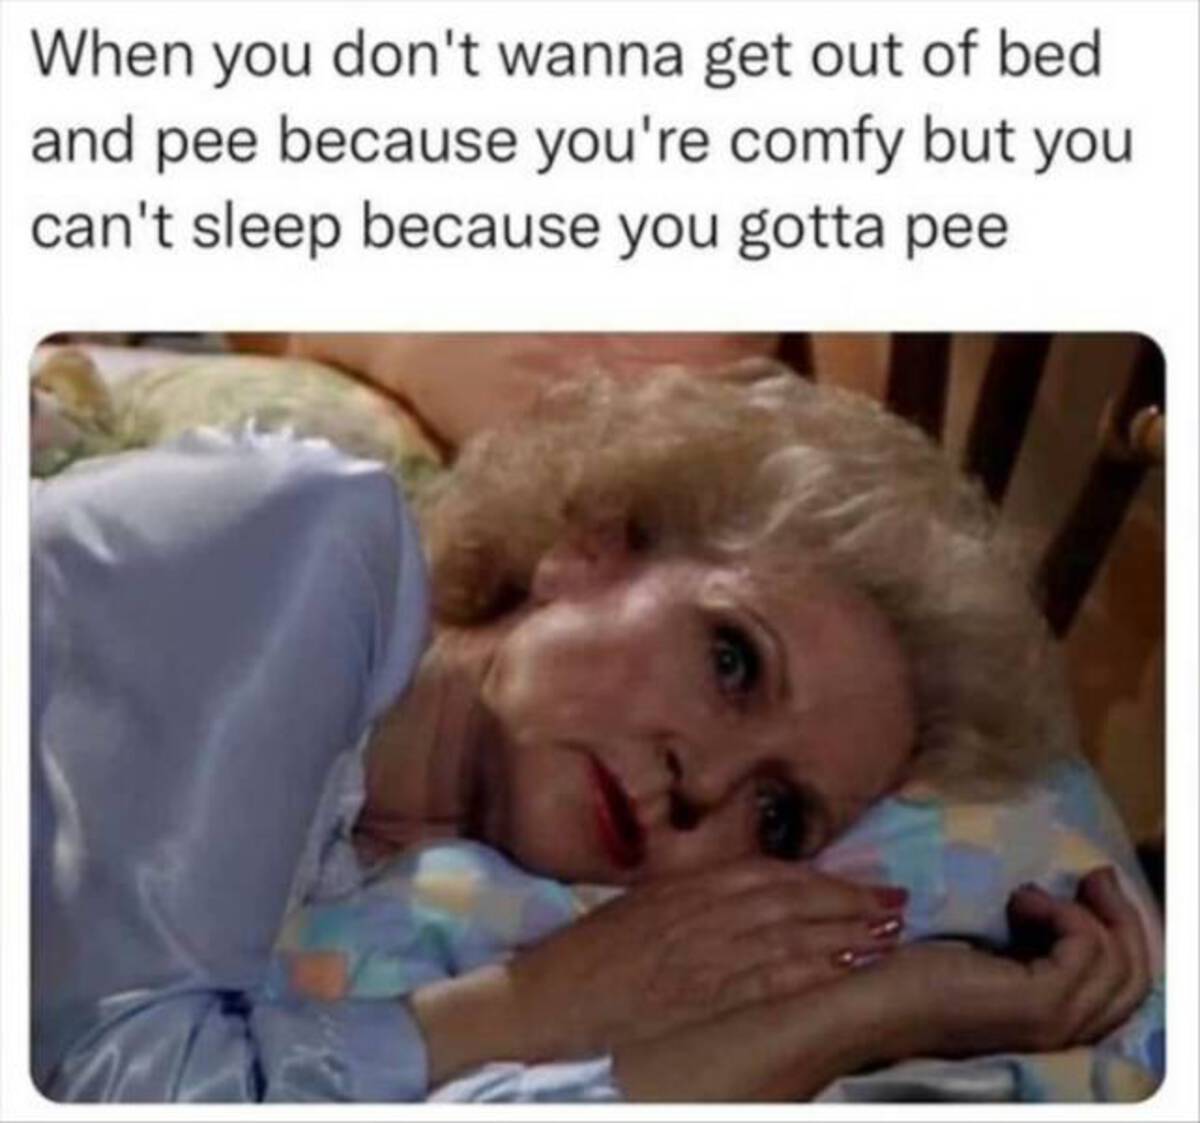 photo caption - When you don't wanna get out of bed and pee because you're comfy but you can't sleep because you gotta pee